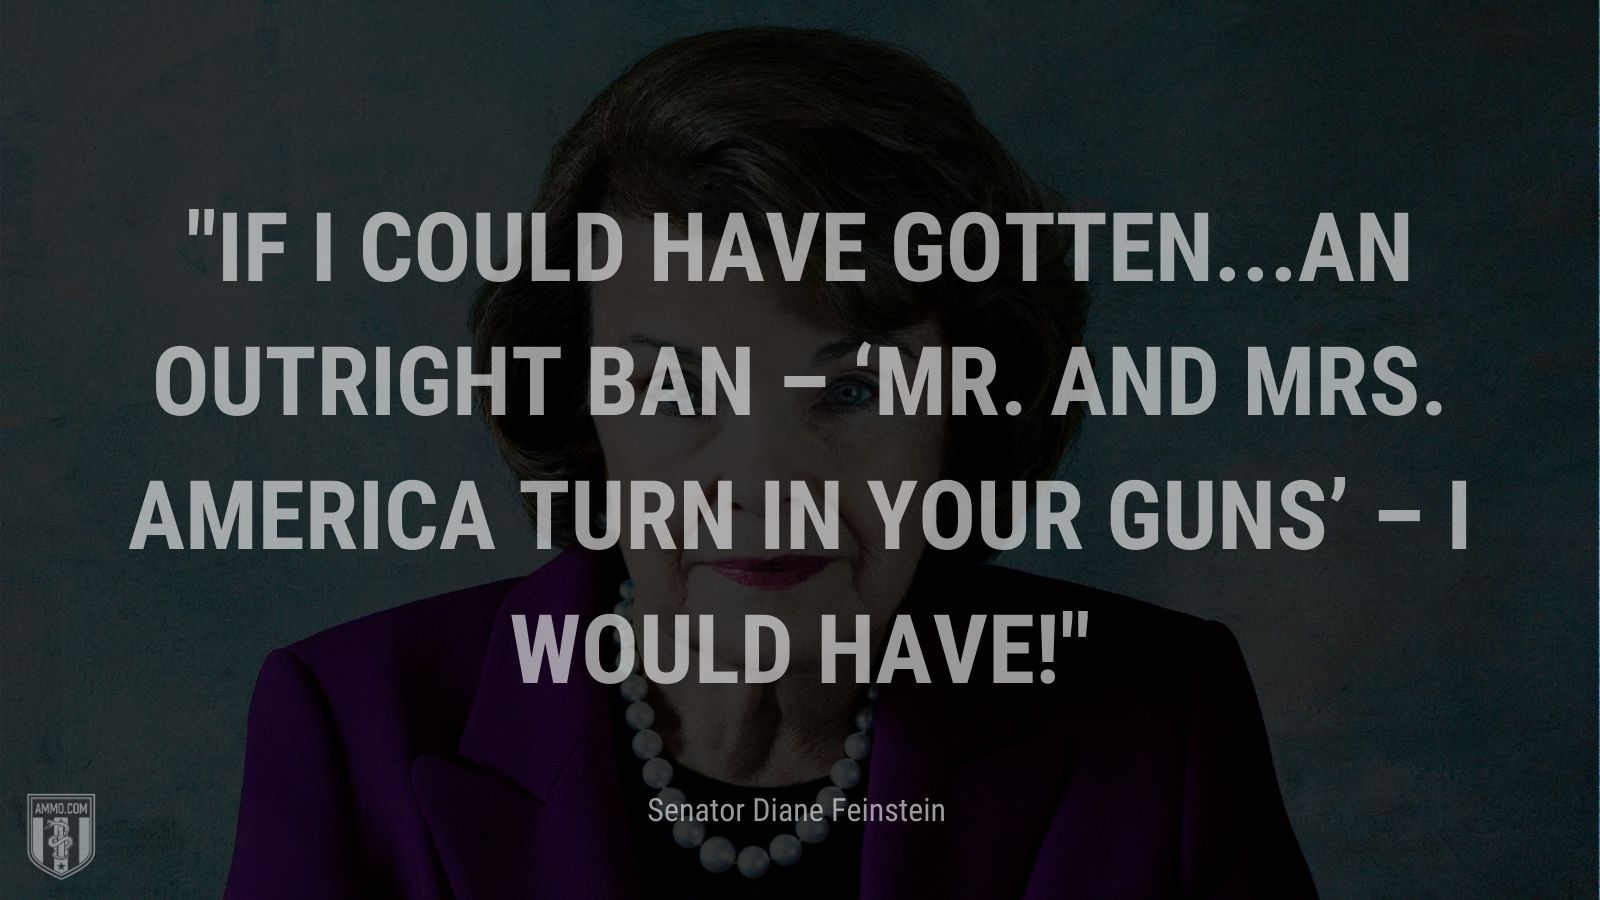 “If I could have gotten...an outright ban – ‘Mr. and Mrs. America turn in your guns’ – I would have!” -Senator Diane Feinstein